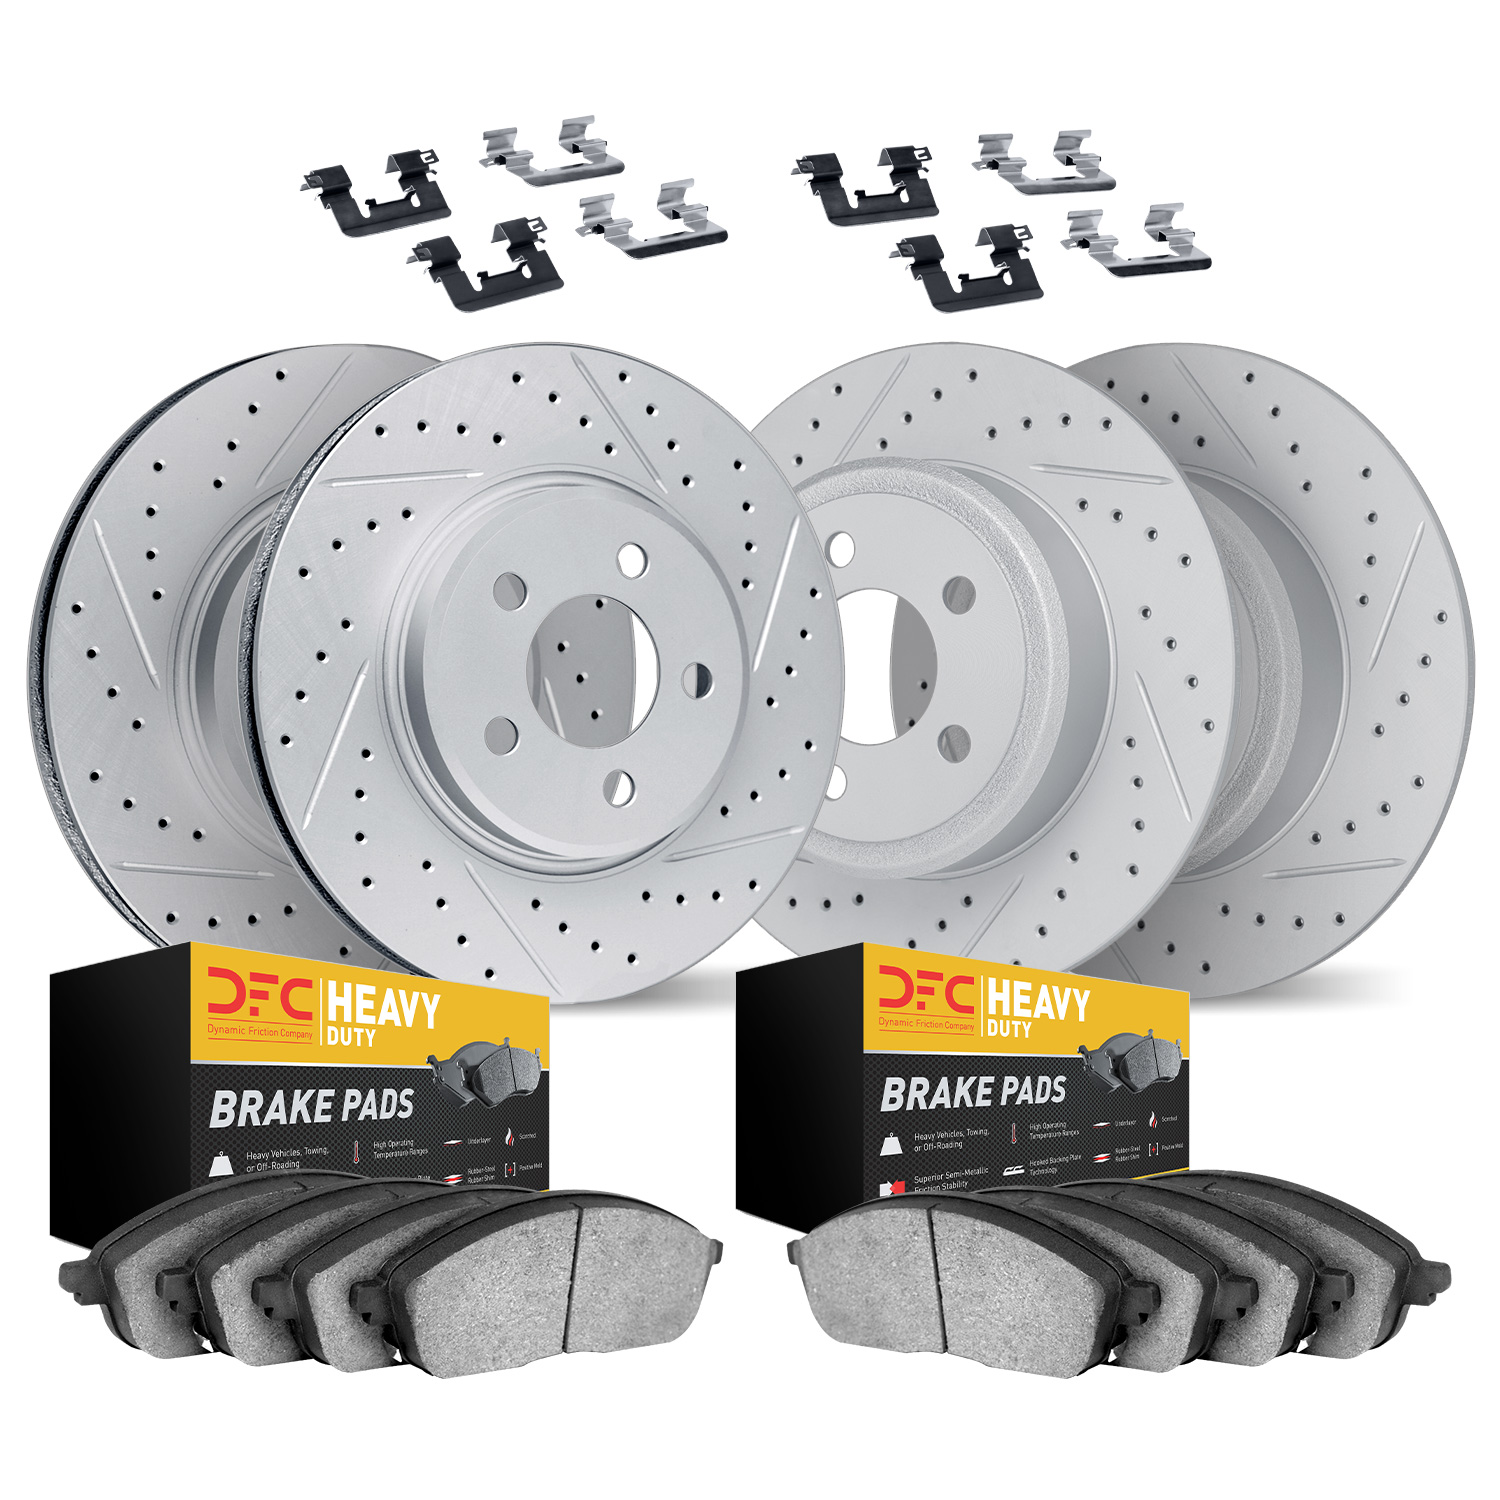 2214-42002 Geoperformance Drilled/Slotted Rotors w/Heavy-Duty Pads Kit & Hardware, Fits Select Mopar, Position: Front and Rear